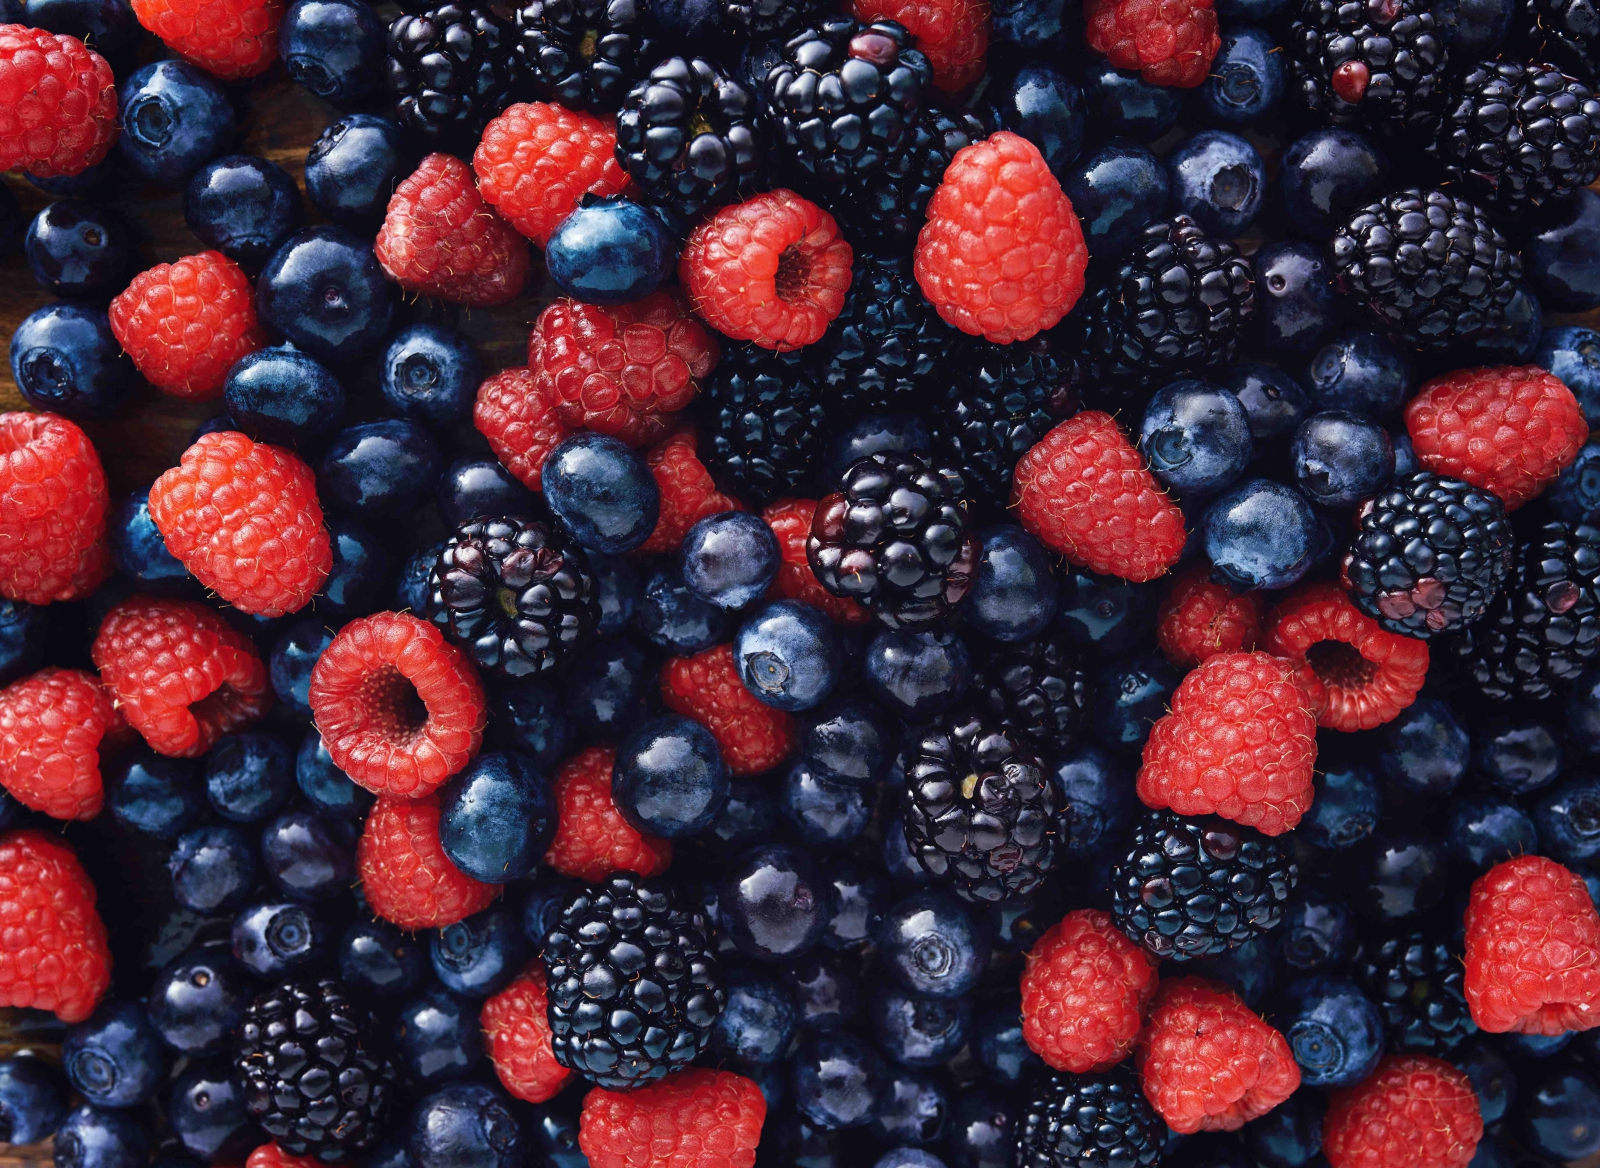 Berries are an excellent source of slow carbohydrates and fiber